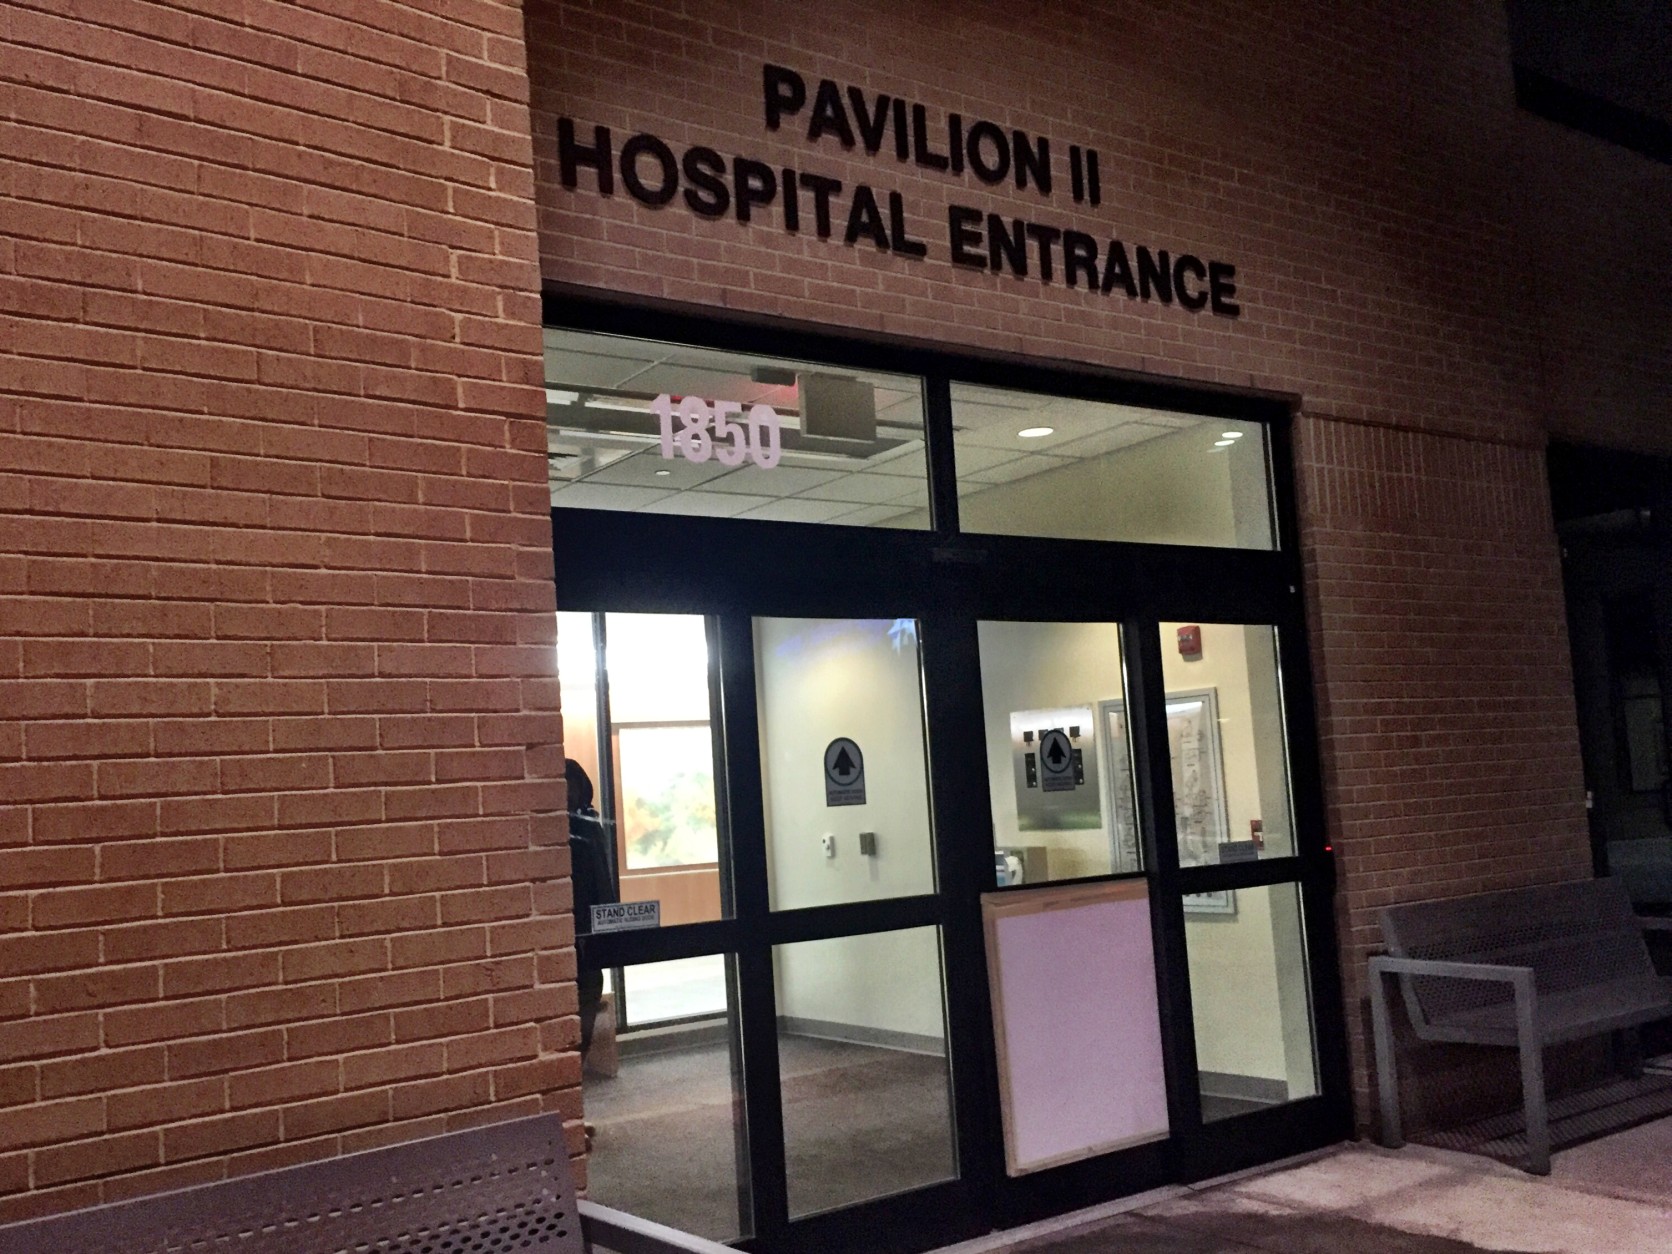 The door that was shot is now covered at Reston Hospital Center. (WTOP/Neal Augenstein)